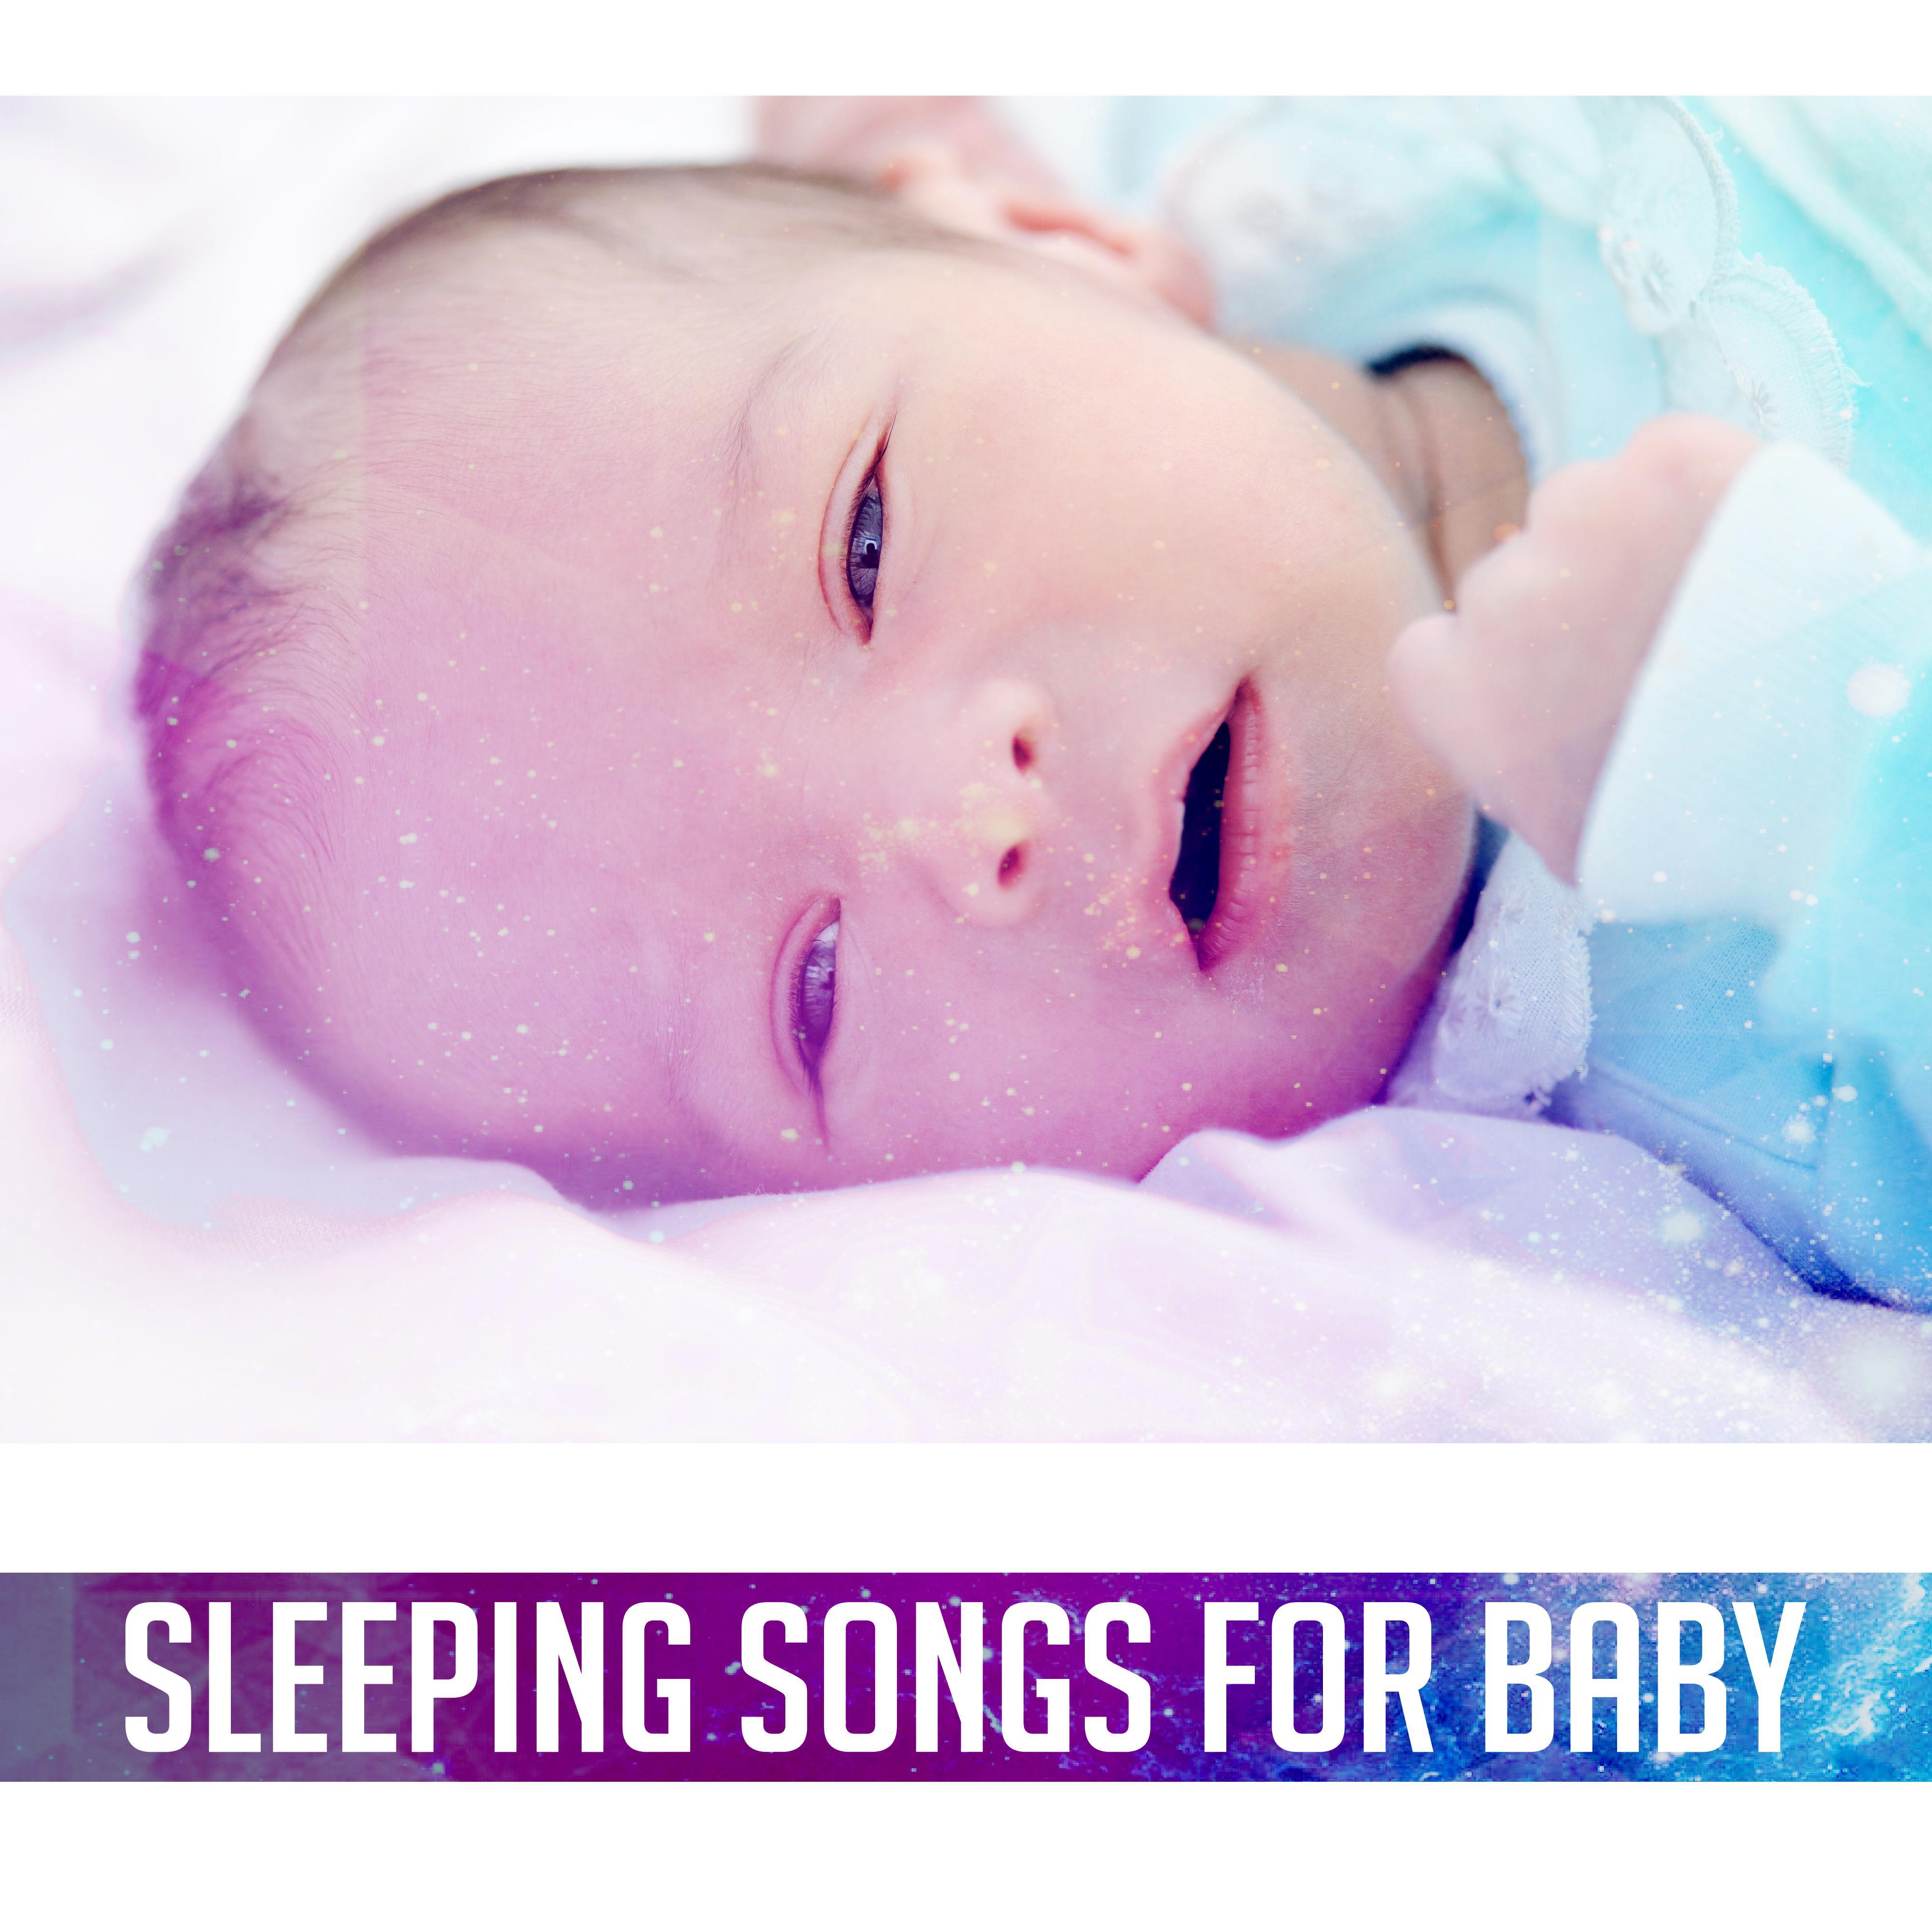 Sleeping Songs for Baby  Calm Down Your Baby, Sweet Lullabies, Child Rest, New Age Melodies